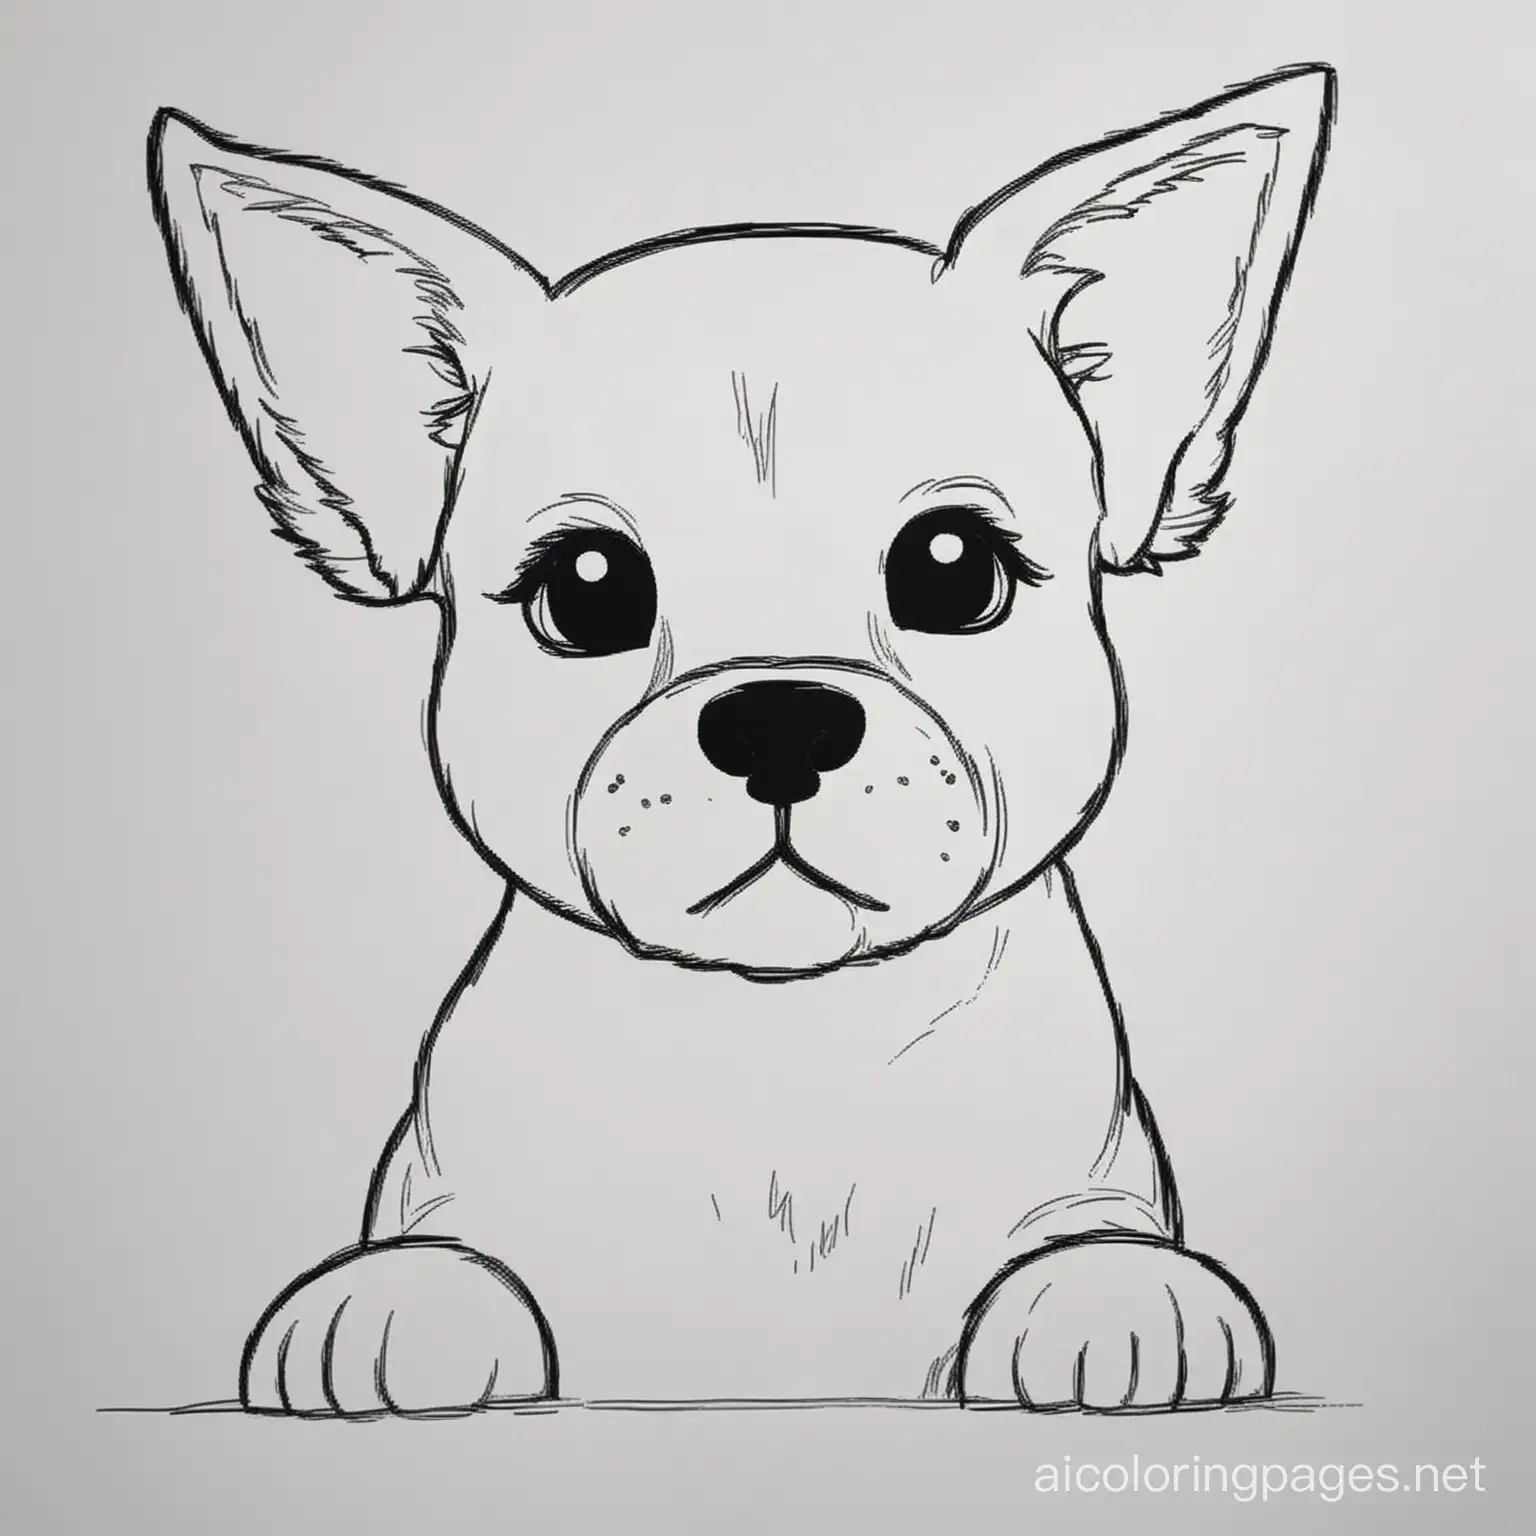 Dog-Coloring-Page-with-Easy-Line-Art-on-White-Background